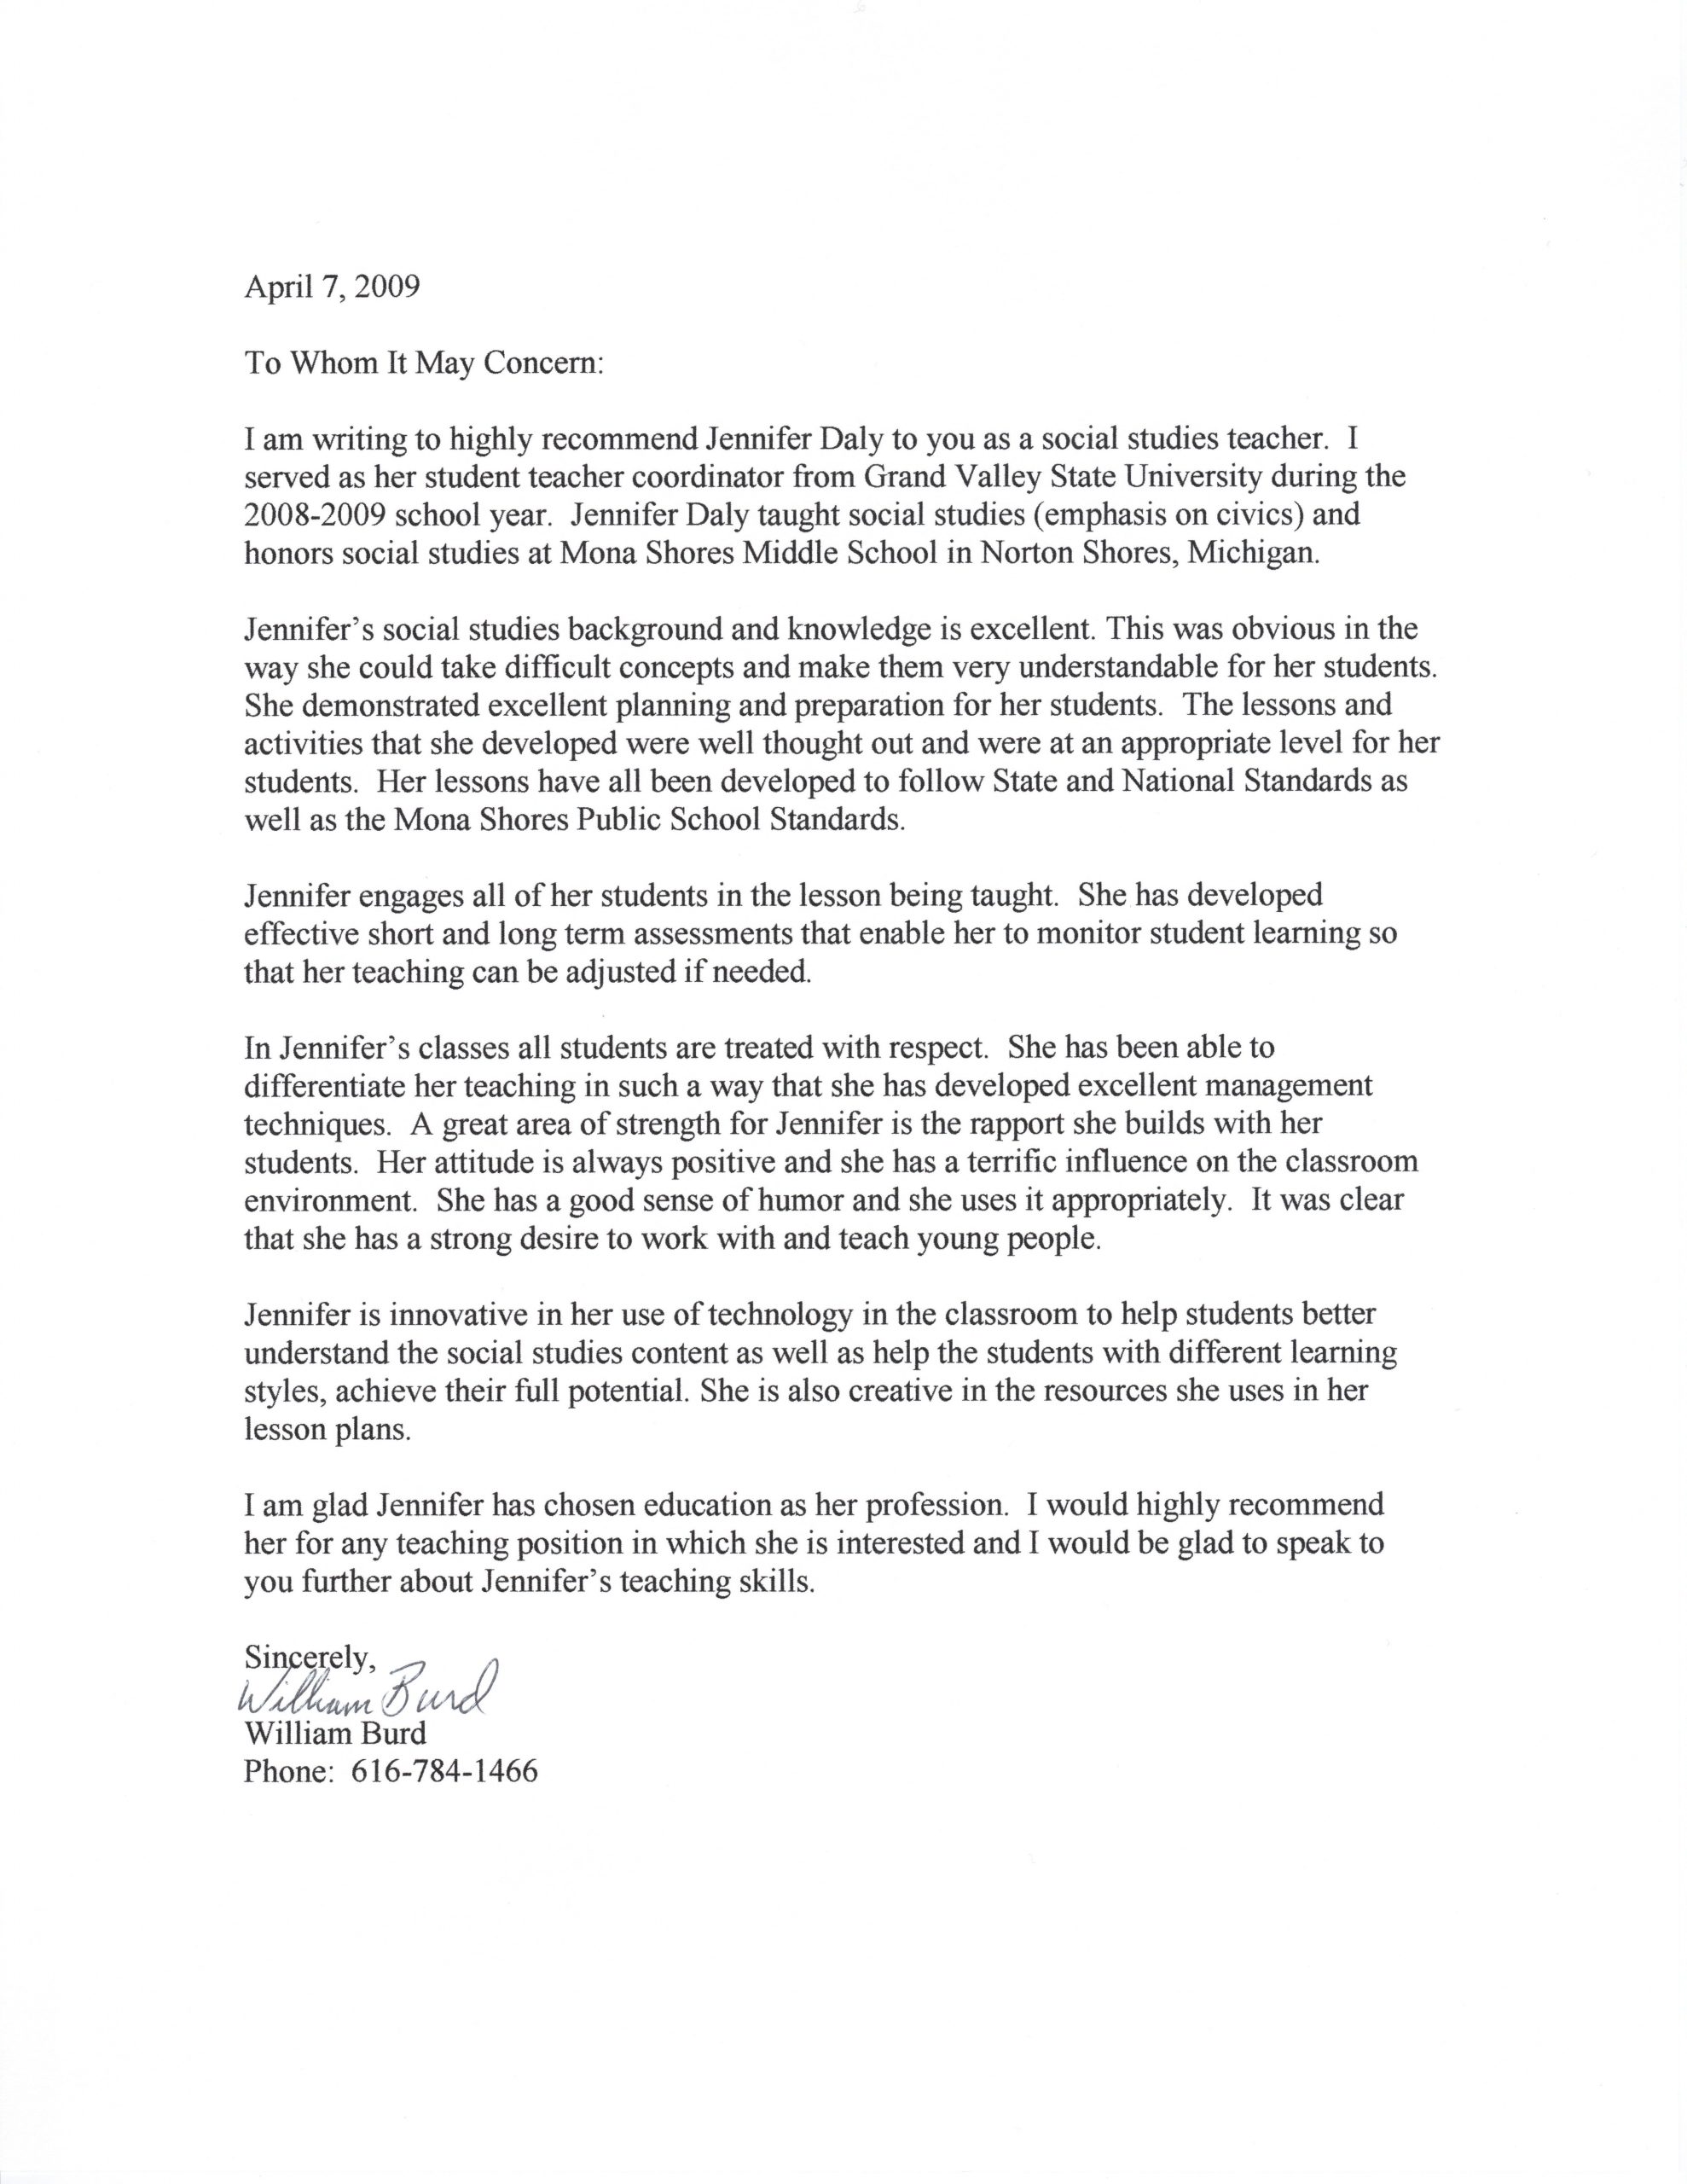 letter of recommendation sample for special education teacher